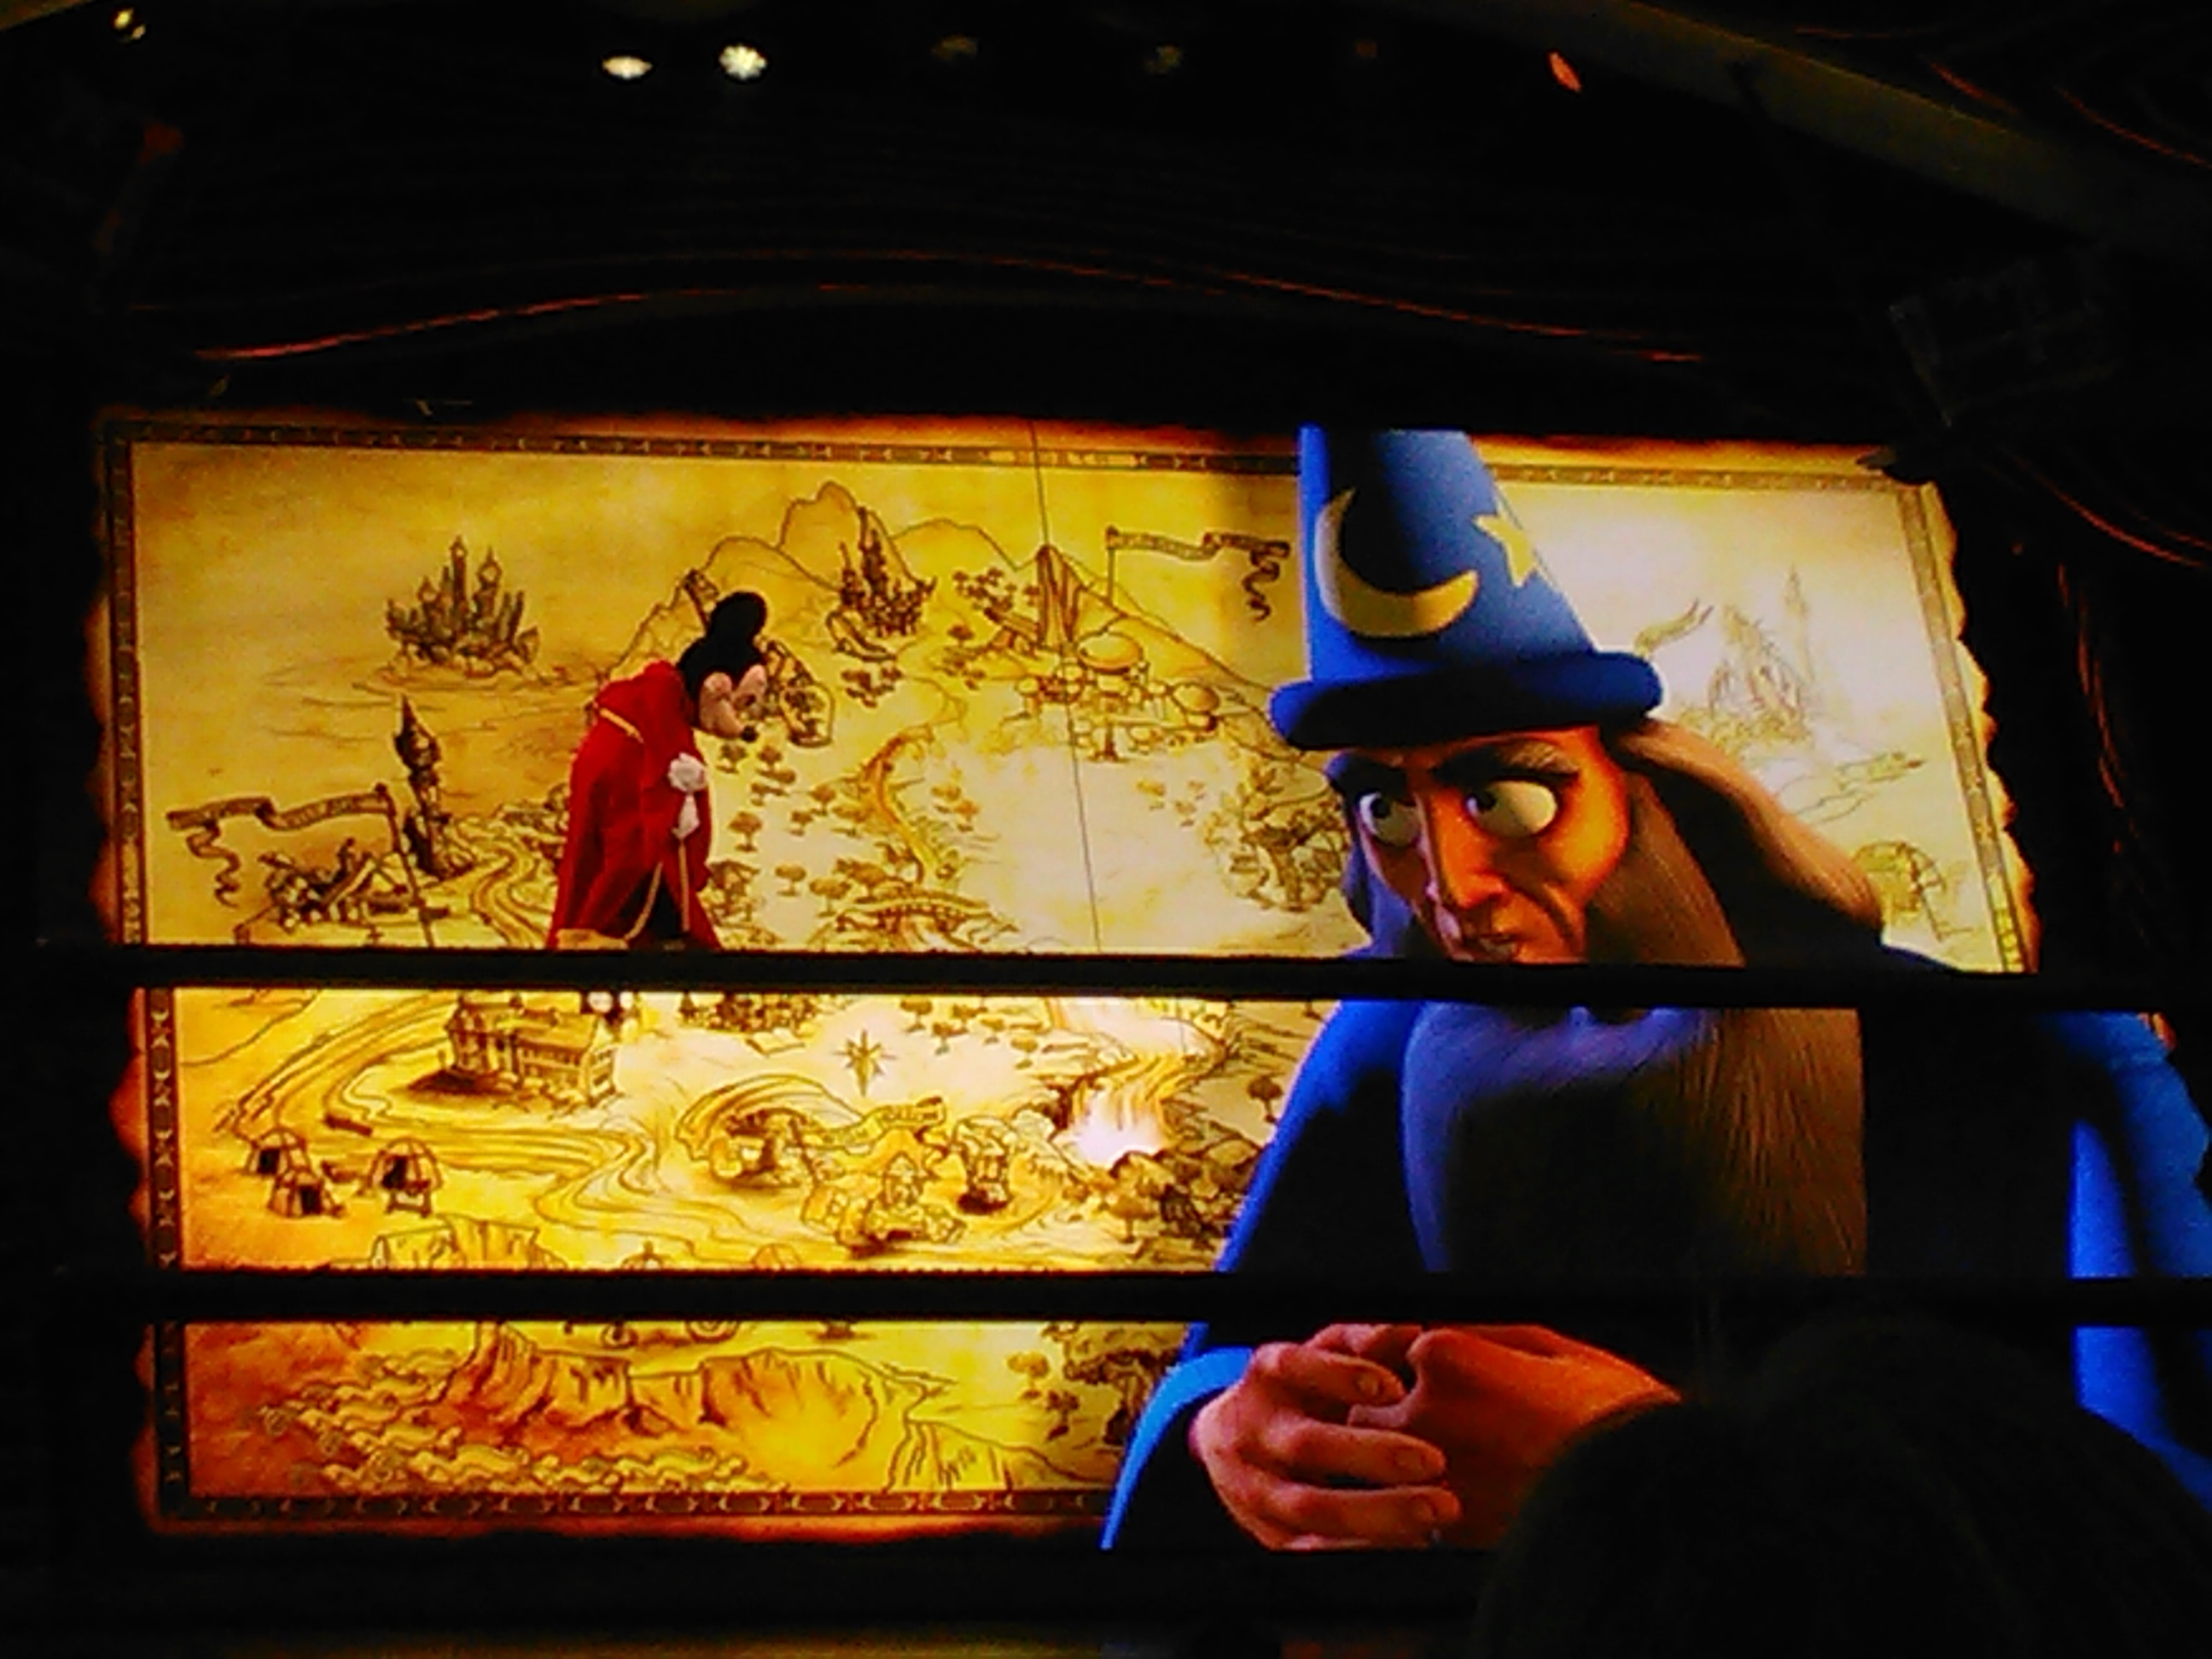 Disneyland’s Mickey and the Magical Map